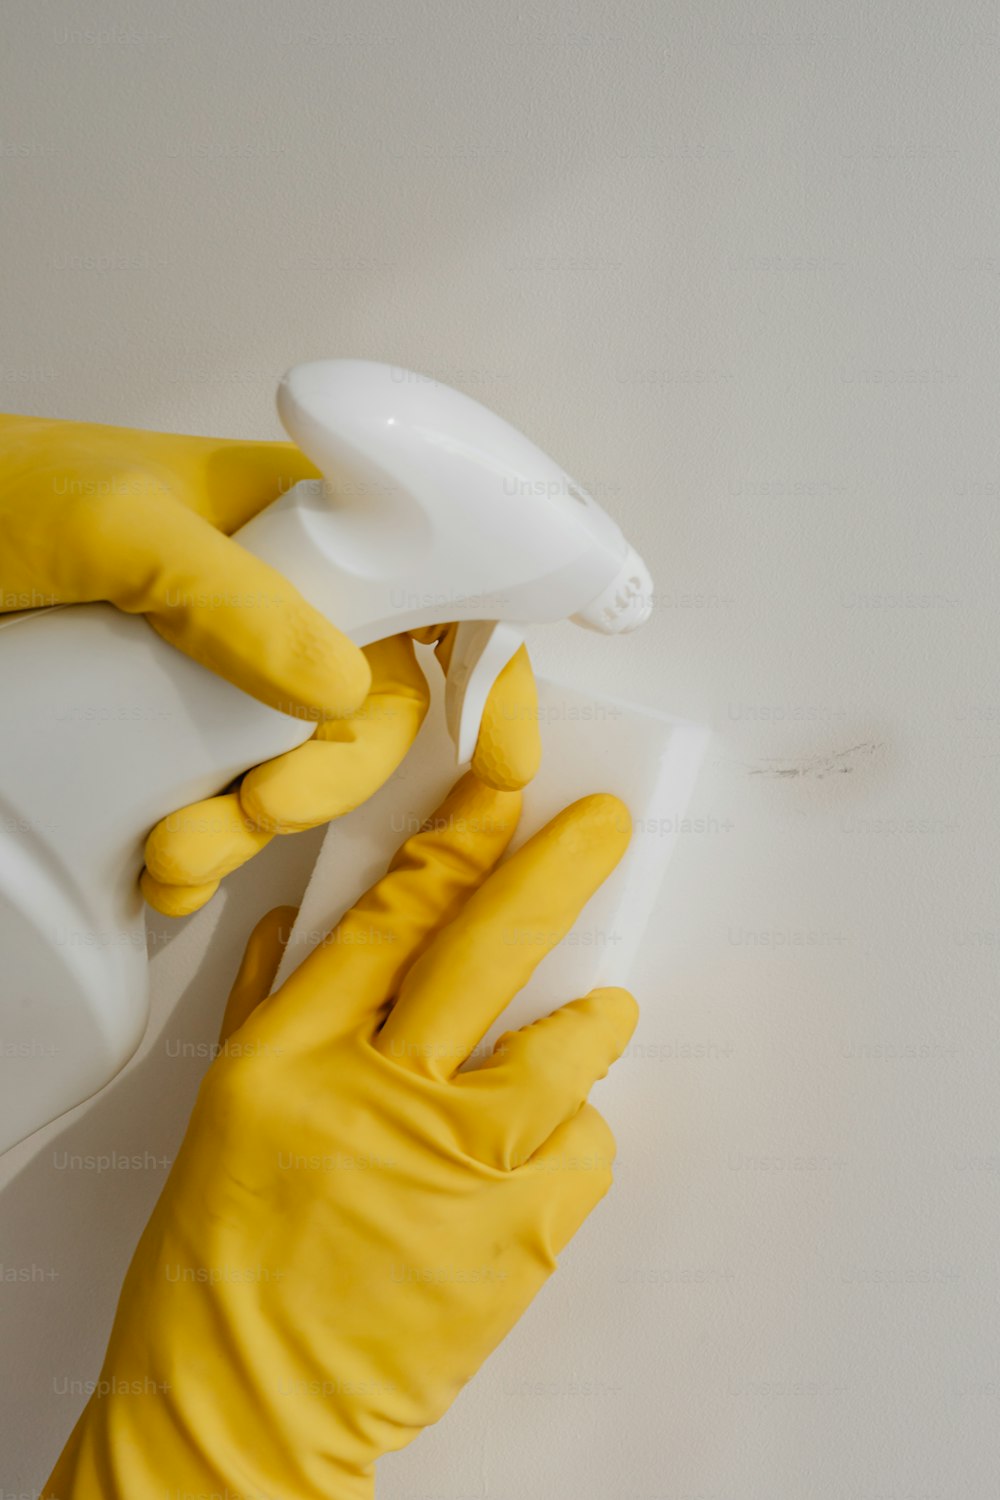 a pair of yellow gloves holding a spray bottle